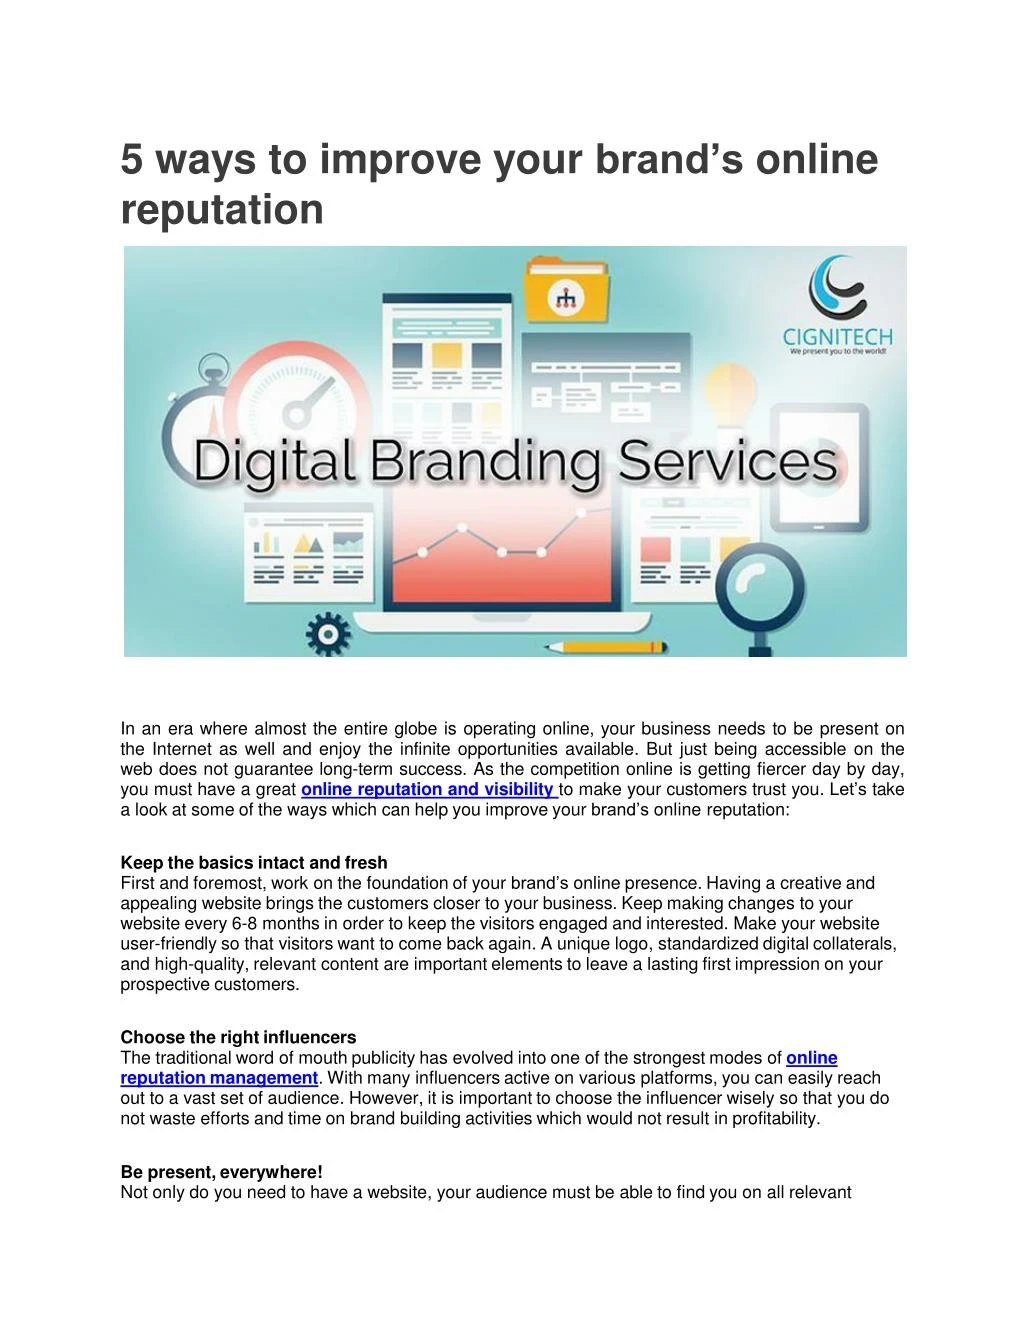 5 ways to improve your brand s online reputation